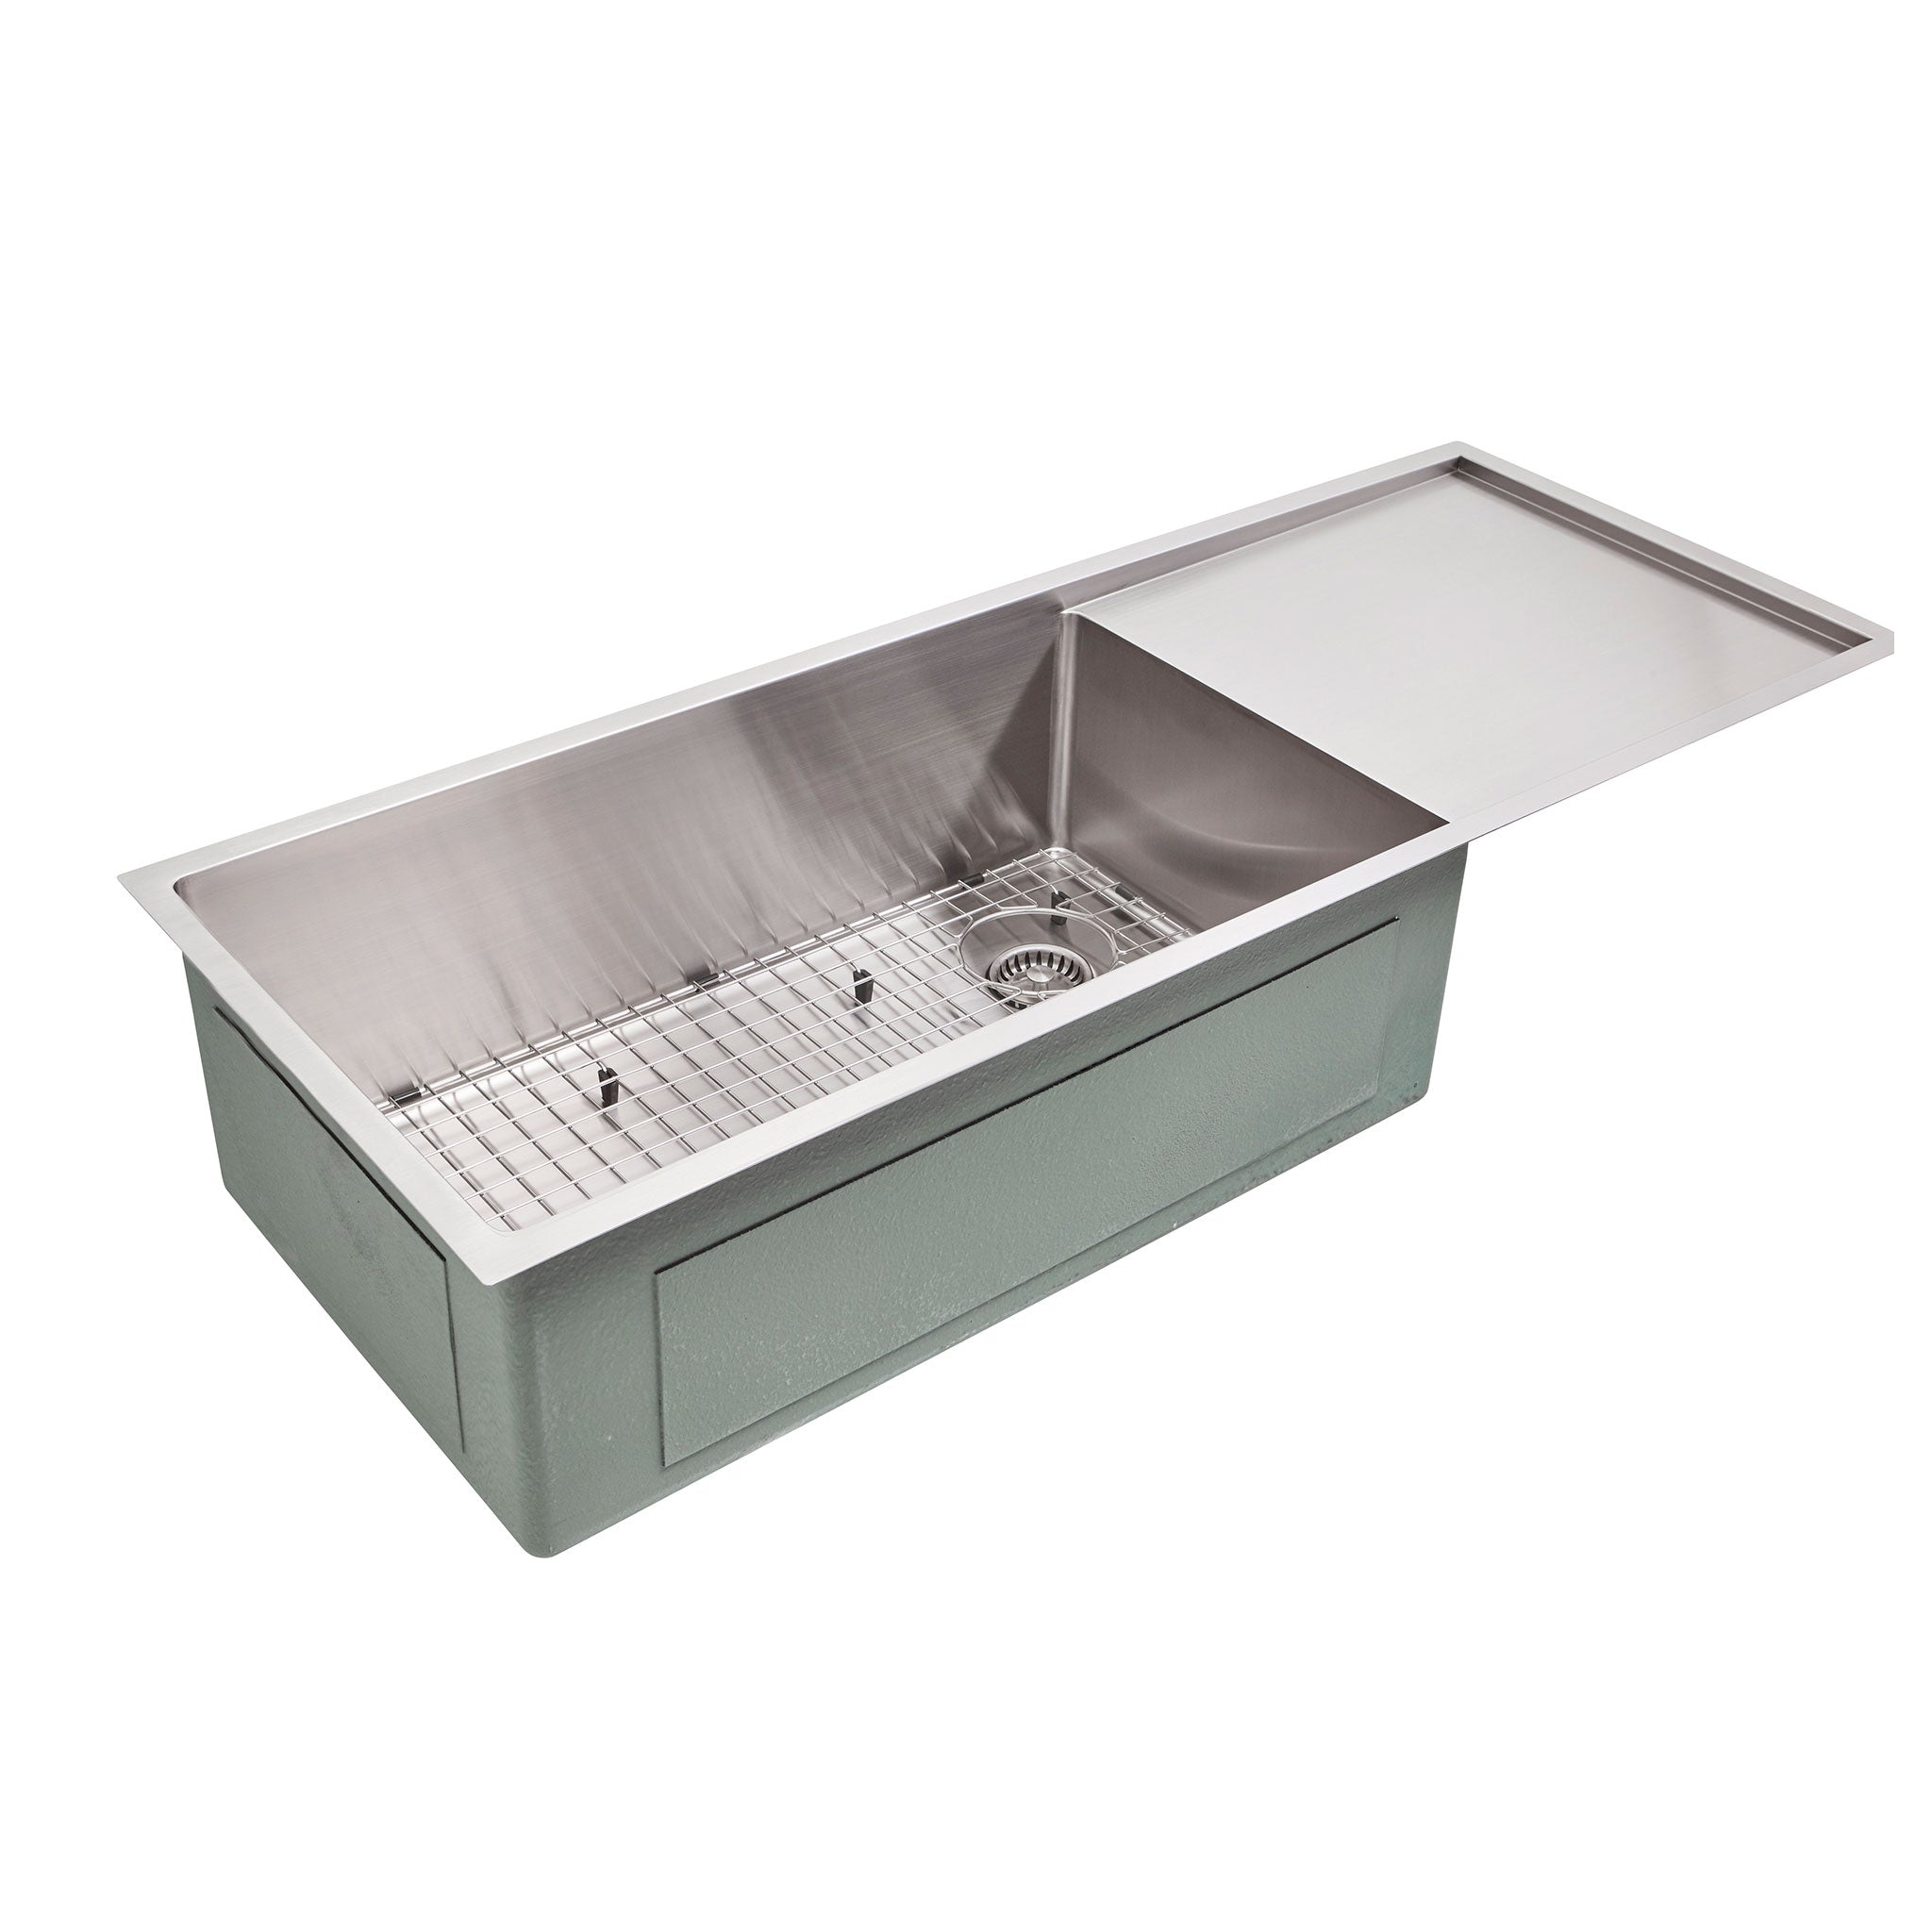 Classic stainless steel drainboard kitchen sink with right offset seamless drain